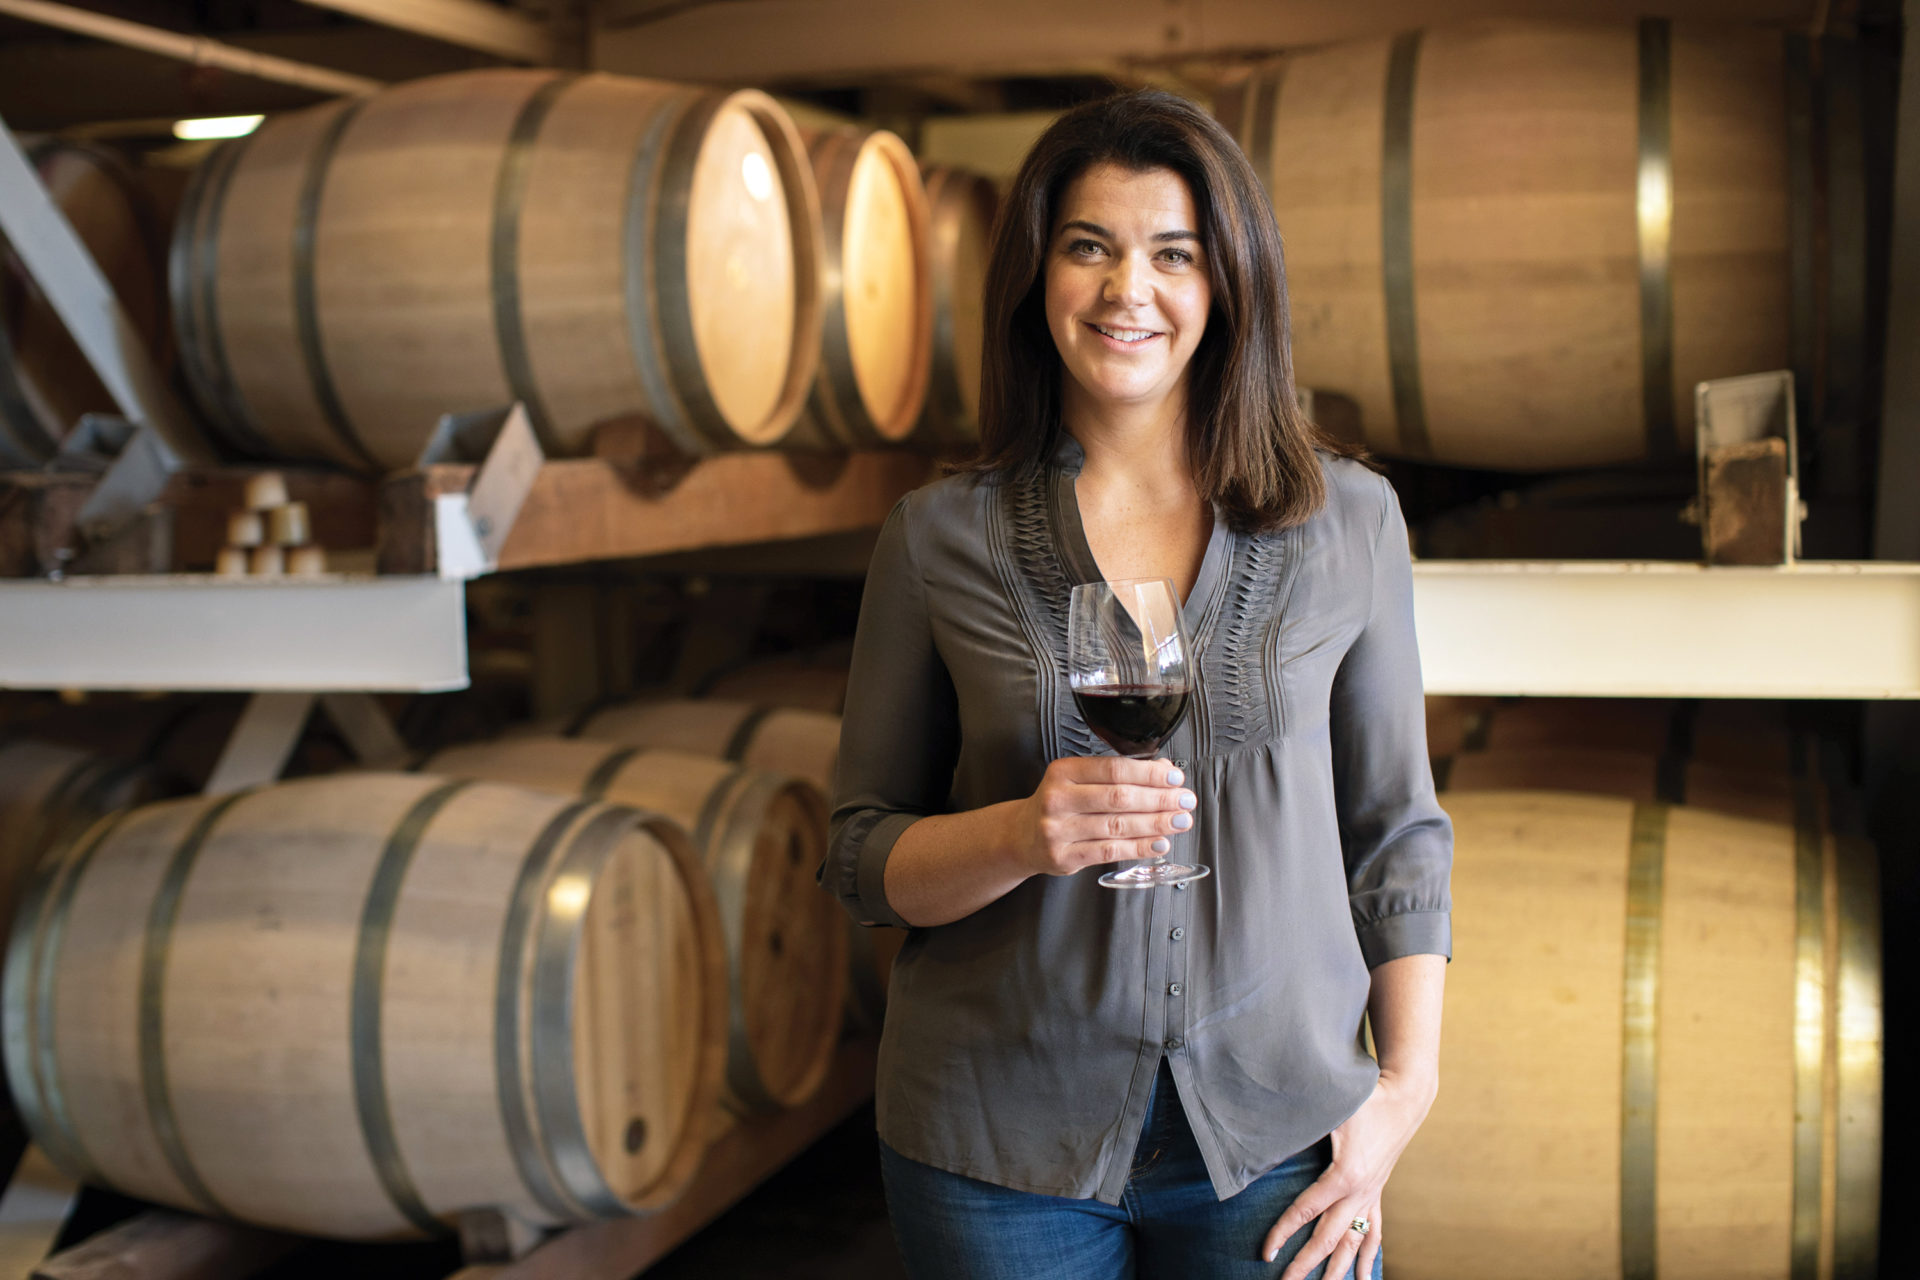 Winemaker Maggie Kruse holding a glass of red wine in front of brown wine barrels on white racks